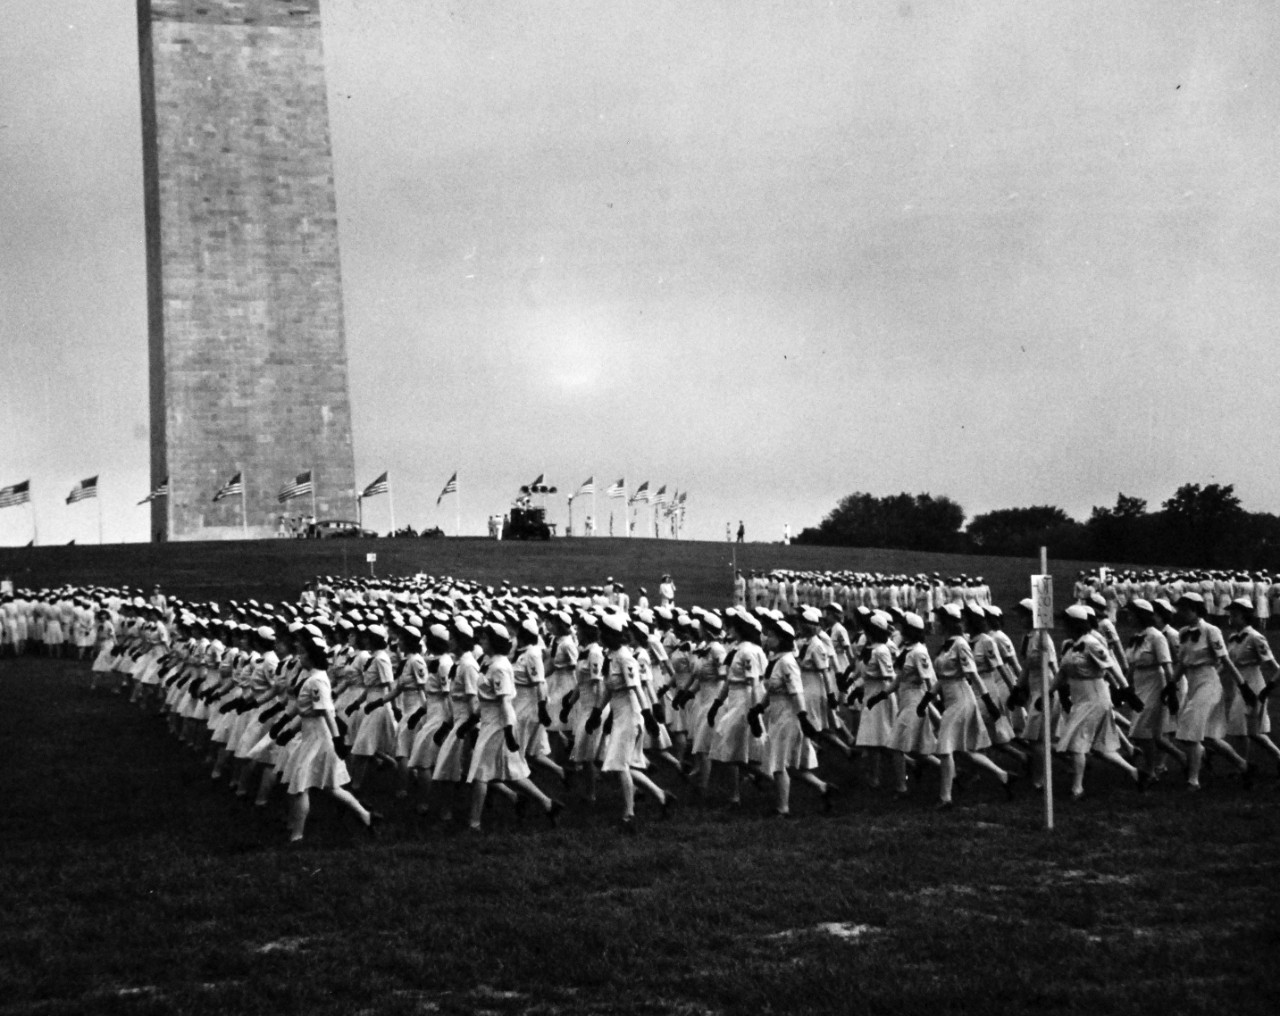 80-G-46257:  WAVES in Washington, D.C., July 1944.  WAVES  hold rally at Washington Monument Grounds to celebrate the second anniversary of the establishment of the Women’s Reserve of the U.S. Navy.  From all over the District of Columbia, companies of WAVES comes in precise formations to take their places for the rally.  Released July 31, 1944.  Official U.S. Navy Photograph, now in the collections of the National Archives.  